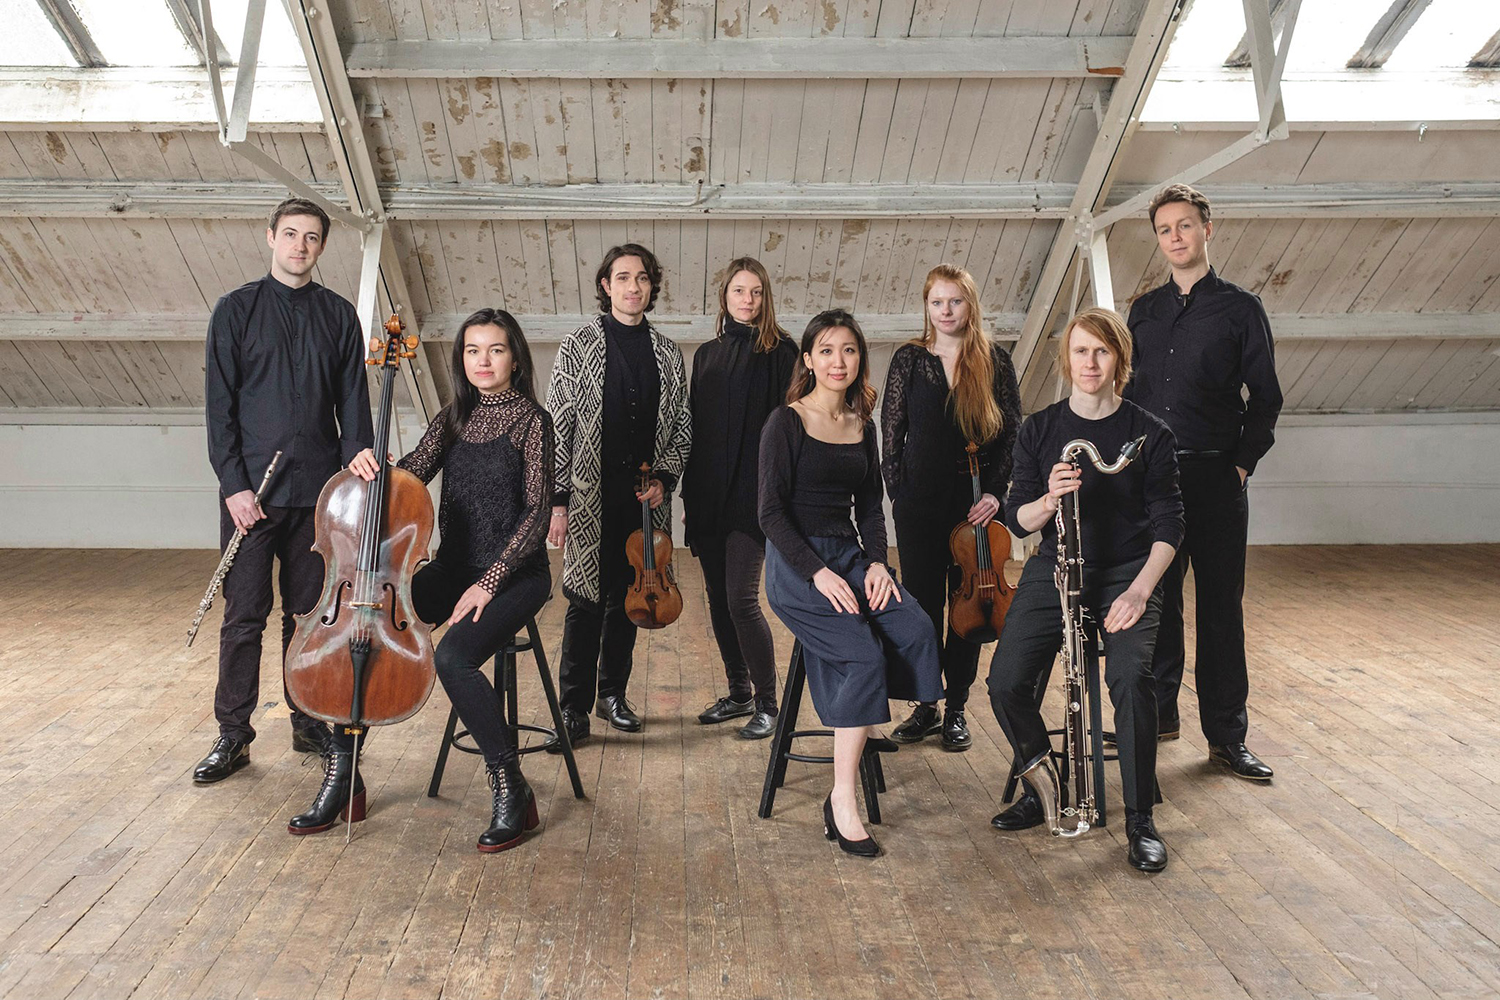 Eight chamber musicians looking at the camera